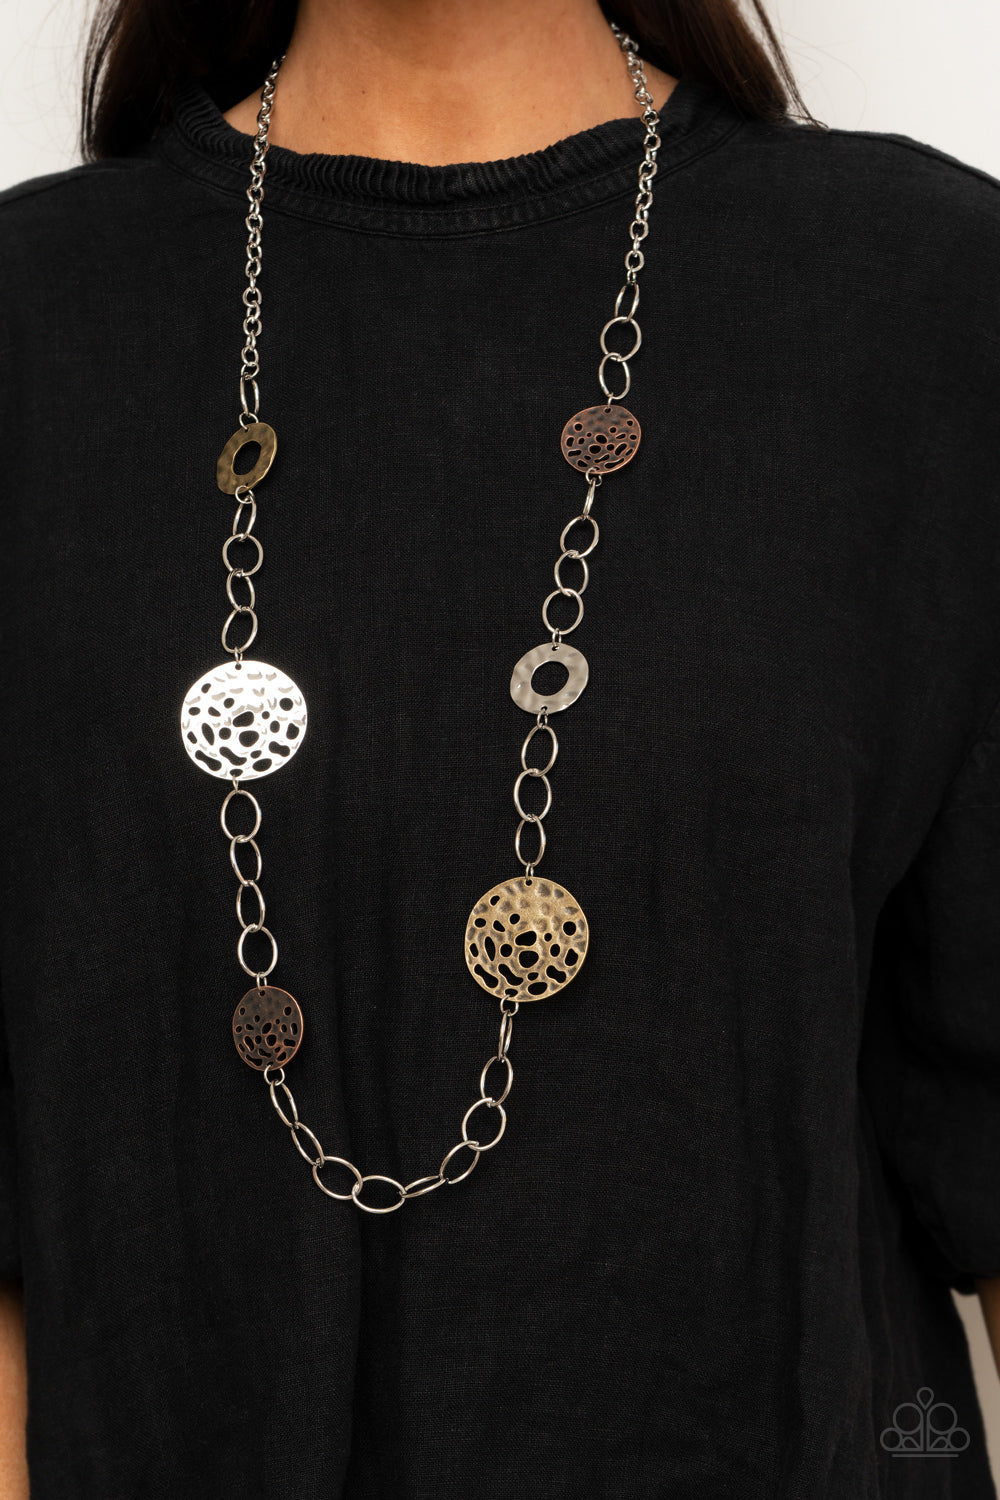 PRE-ORDER - Paparazzi HOLEY Relic - Multi - Necklace & Earrings - $5 Jewelry with Ashley Swint